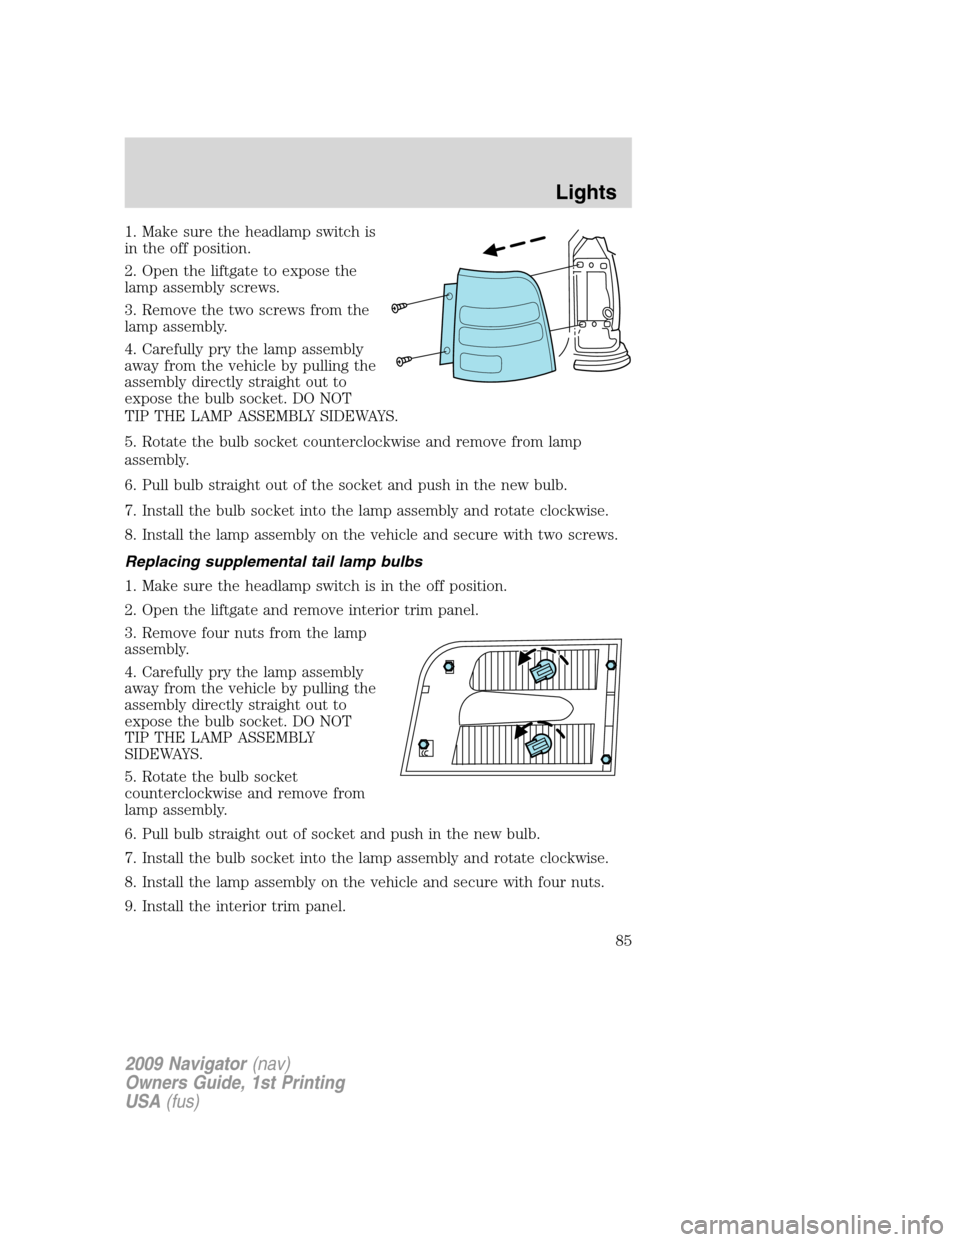 LINCOLN NAVIGATOR 2009  Owners Manual 1. Make sure the headlamp switch is
in the off position.
2. Open the liftgate to expose the
lamp assembly screws.
3. Remove the two screws from the
lamp assembly.
4. Carefully pry the lamp assembly
aw